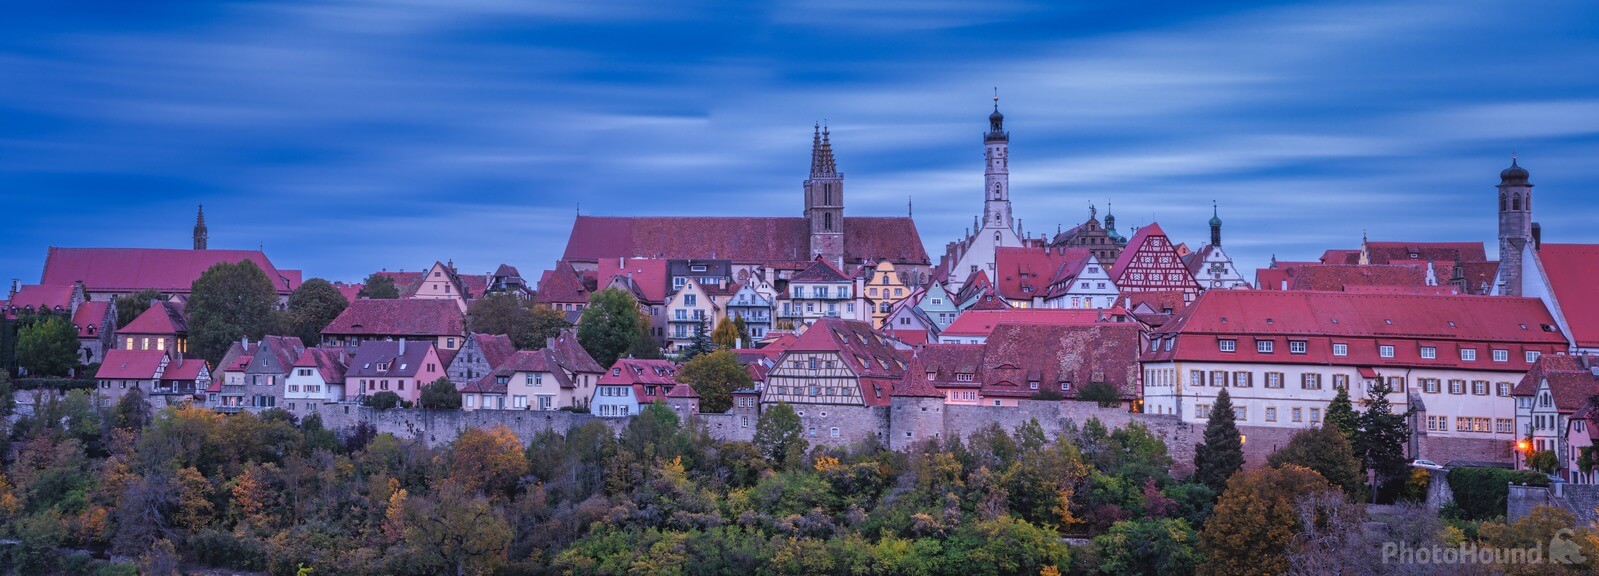 Image of Rothenburg ob der Tauber, Cityscape by Michael Unruh